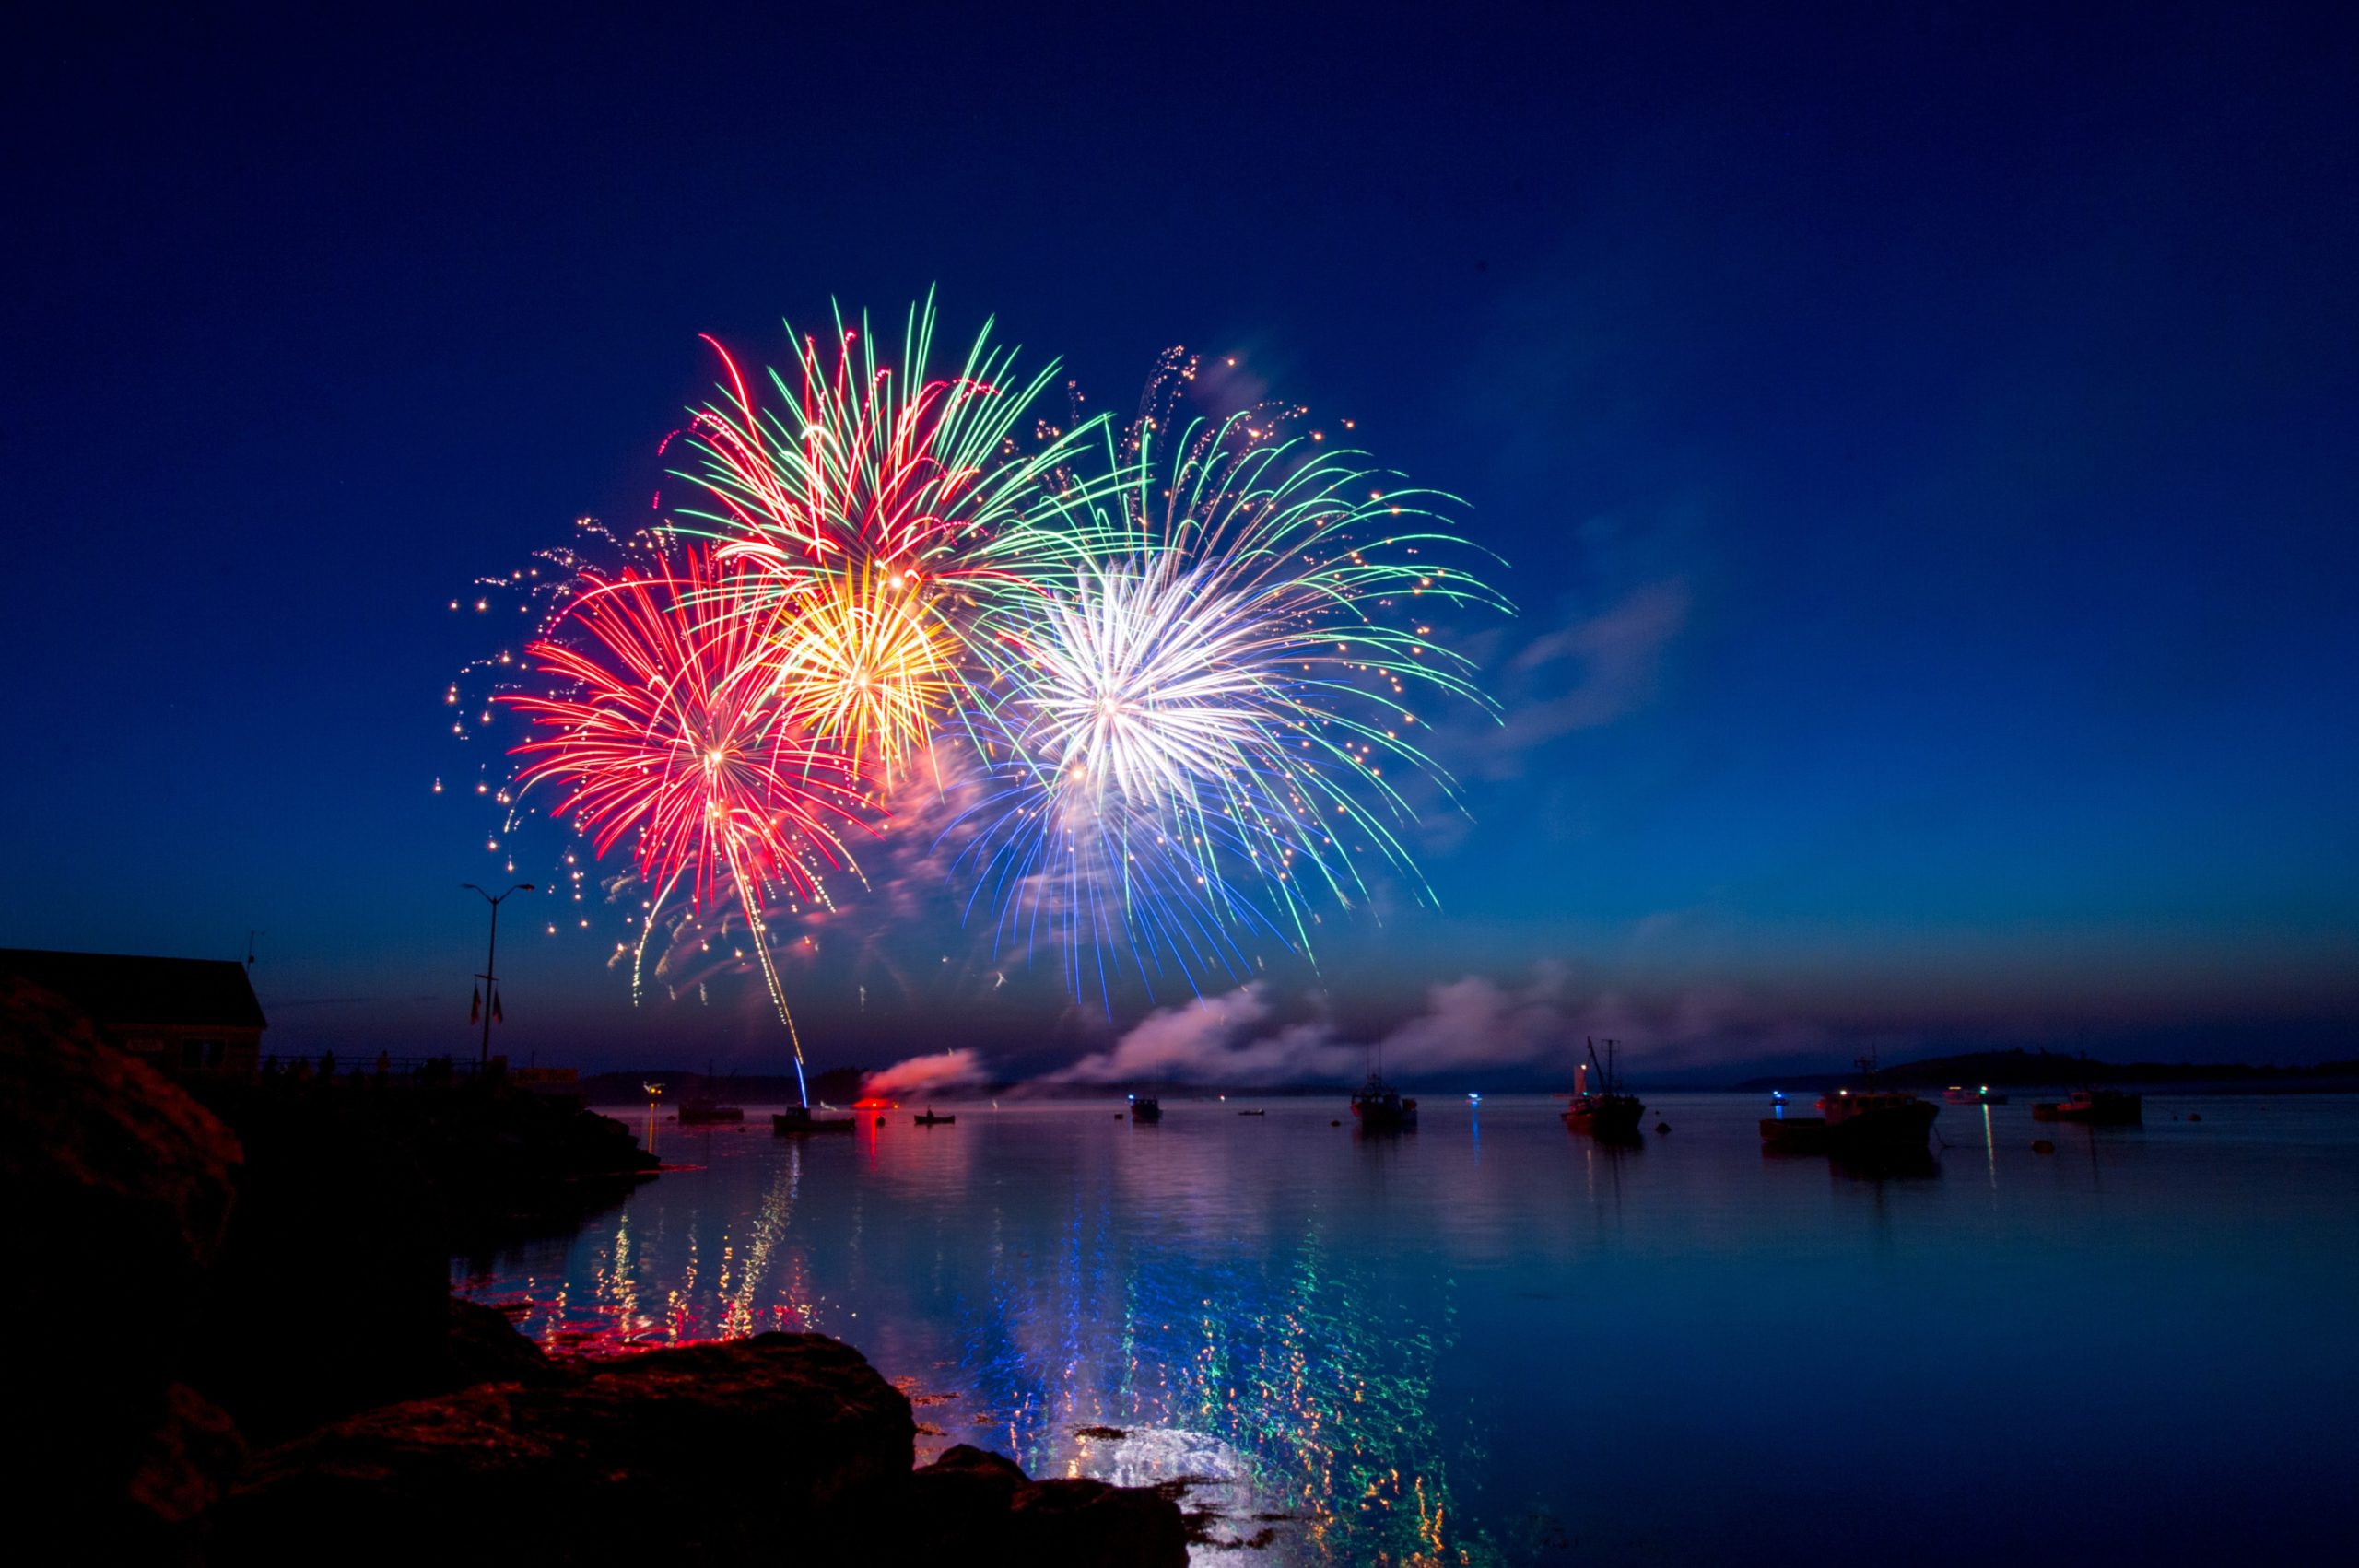 Colorful fireworks bursting over a calm bay at dusk, with boats and a rocky shoreline visible. Reflections of the vibrant red, green, and white lights shimmer on the water's surface as nearby,